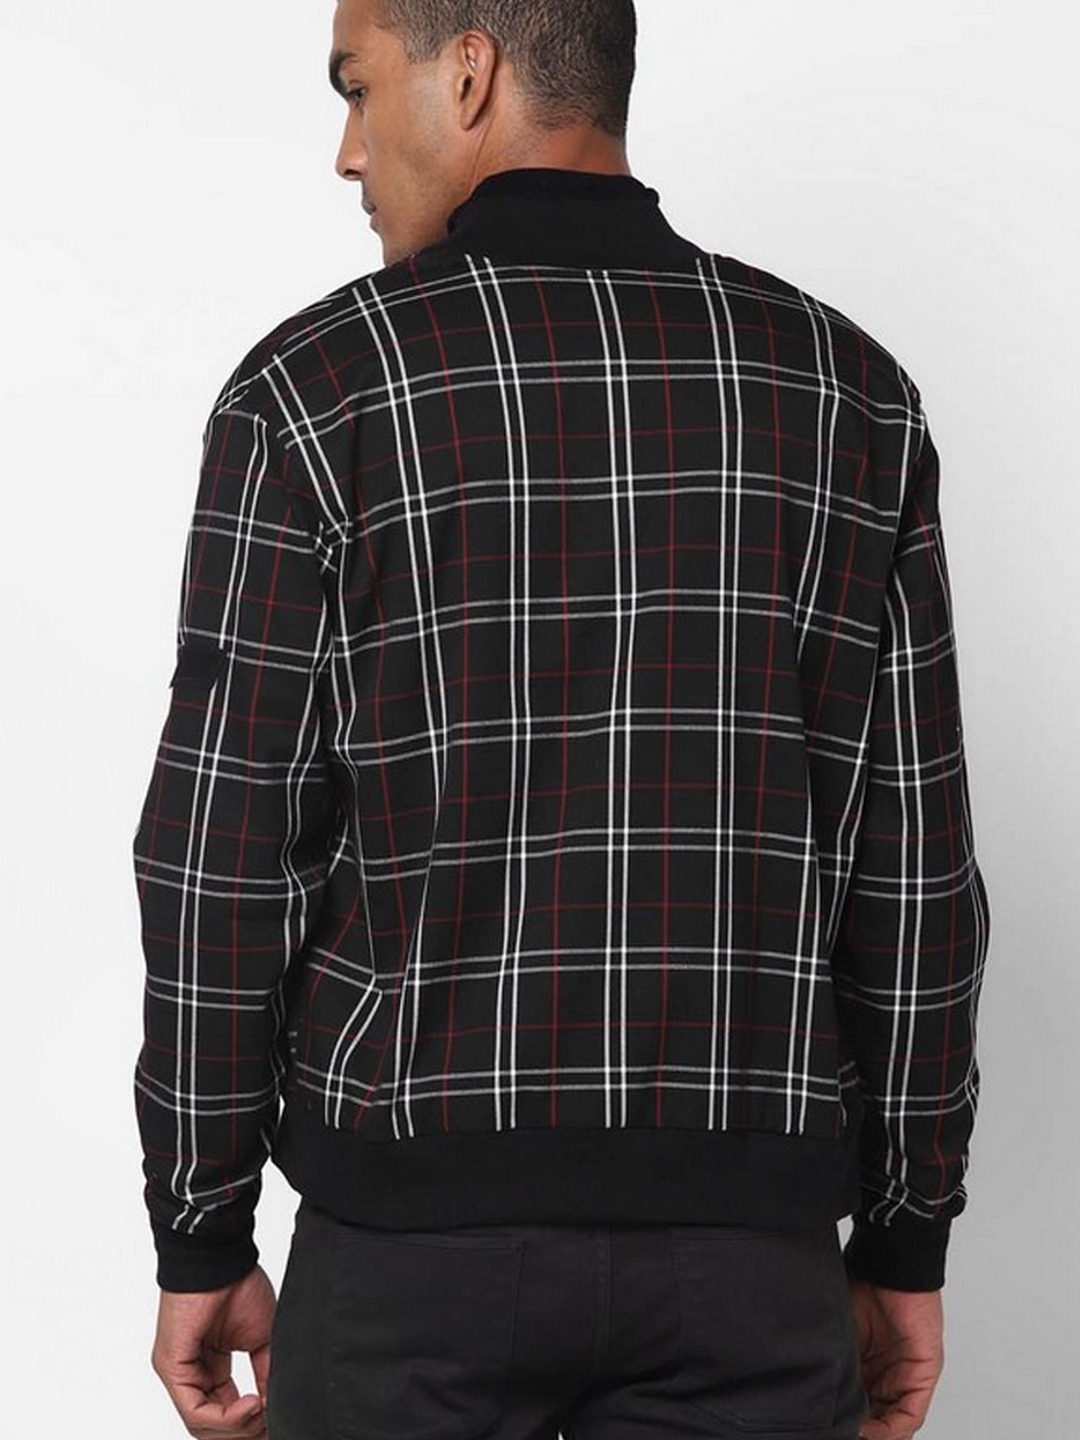 Checked Slim Fit Zip-Front Jacket